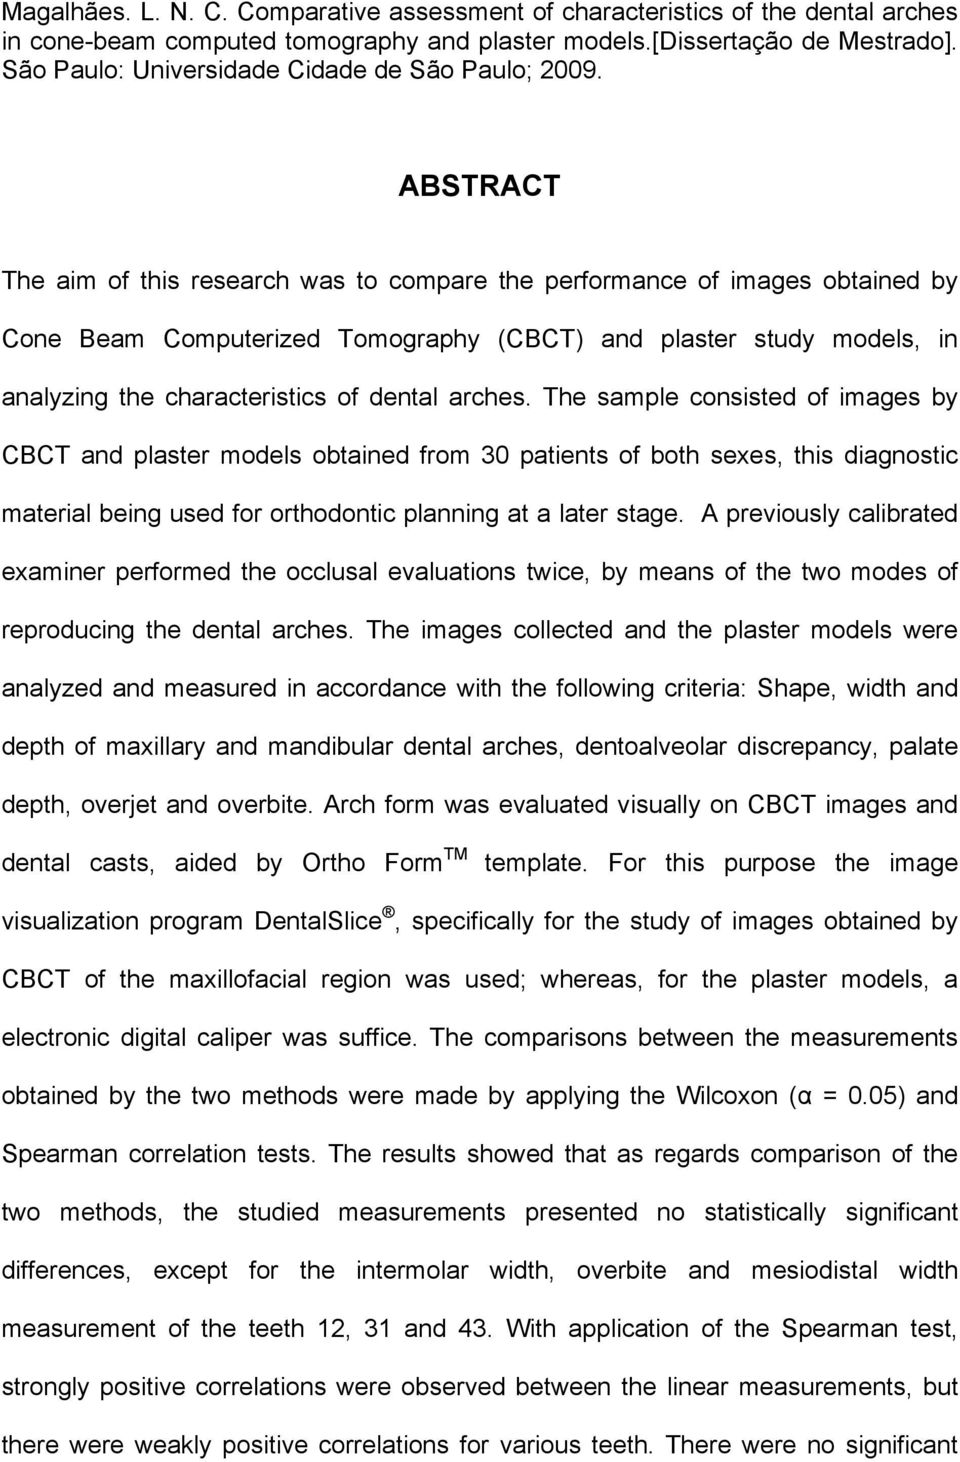 ABSTRACT The aim of this research was to compare the performance of images obtained by Cone Beam Computerized Tomography (CBCT) and plaster study models, in analyzing the characteristics of dental